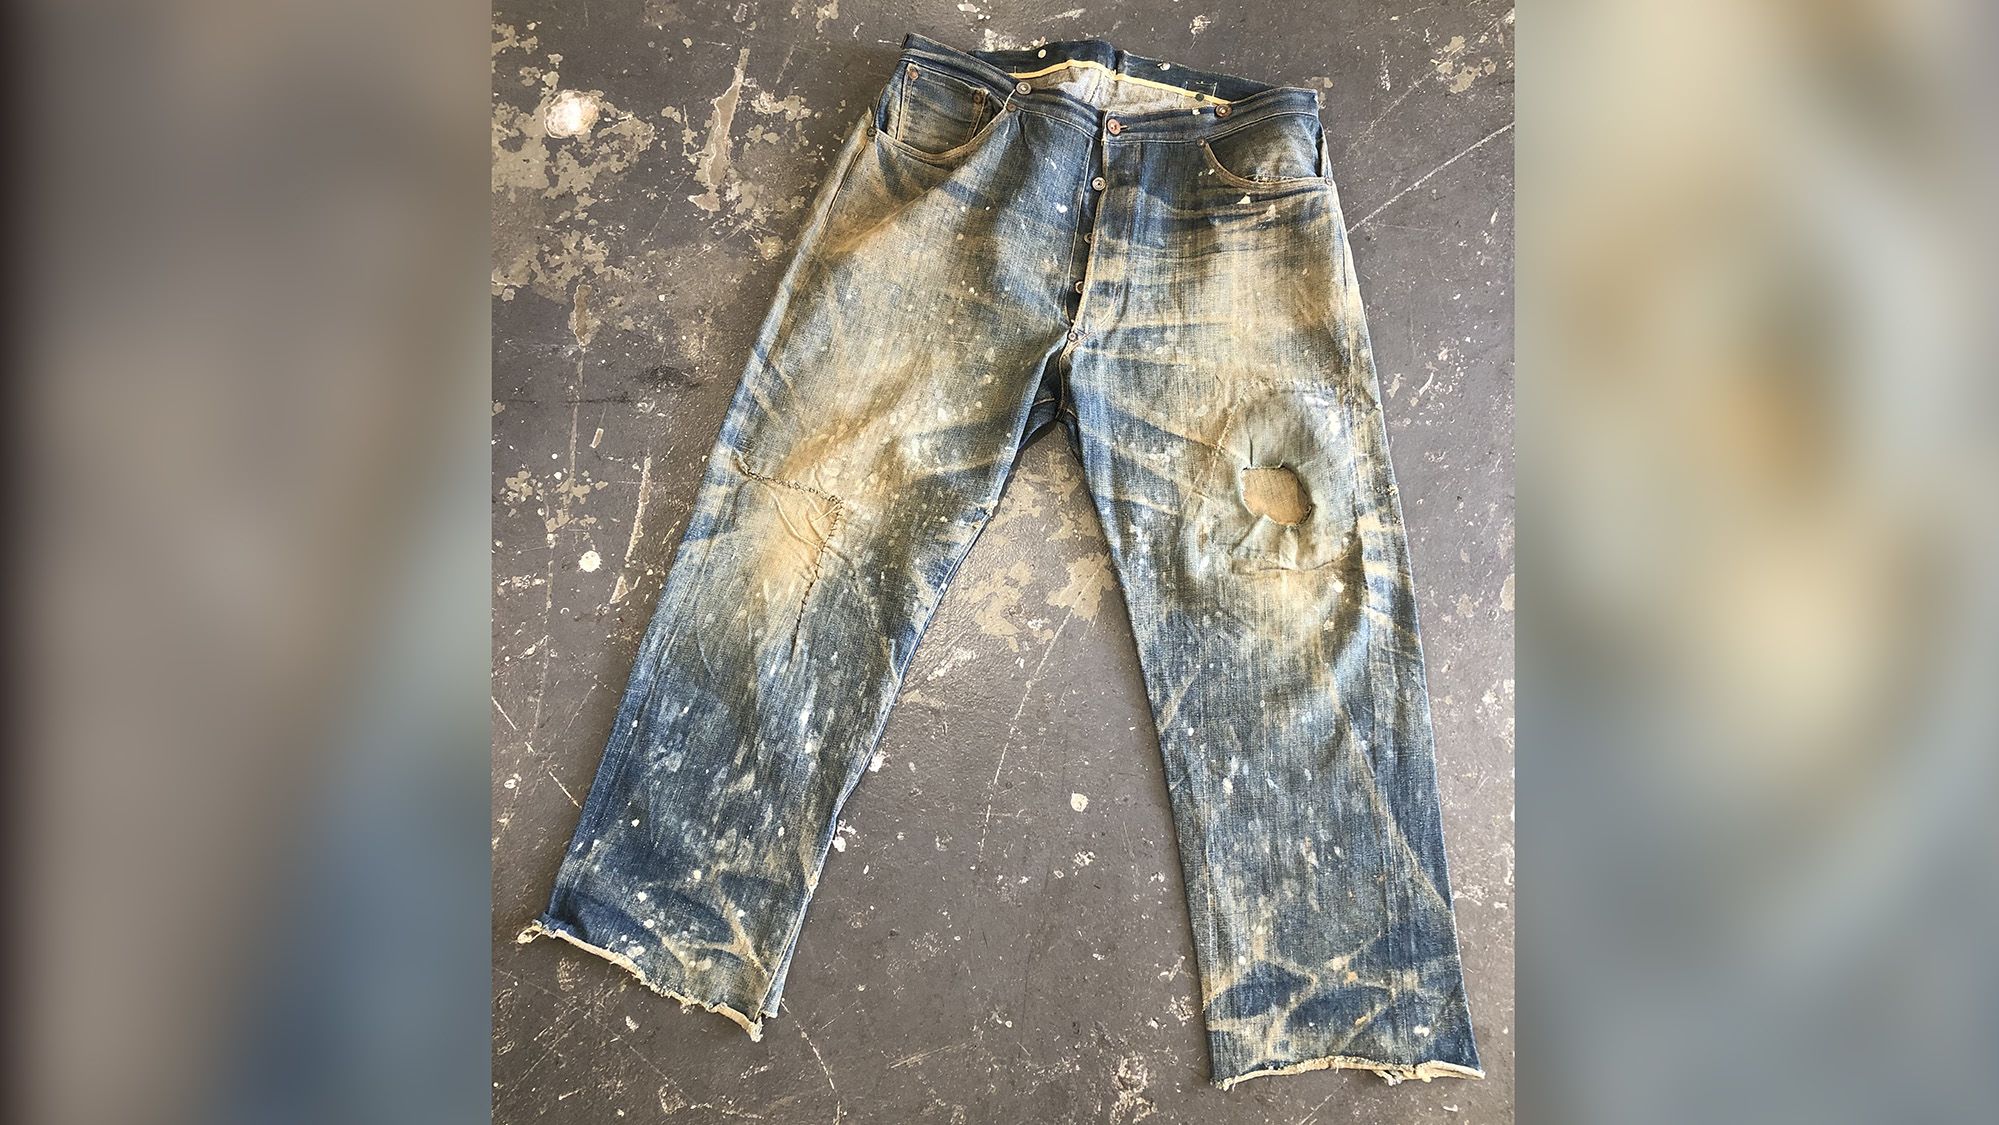 19th-century Levi's jeans found in mine shaft for over $87,000 | CNN